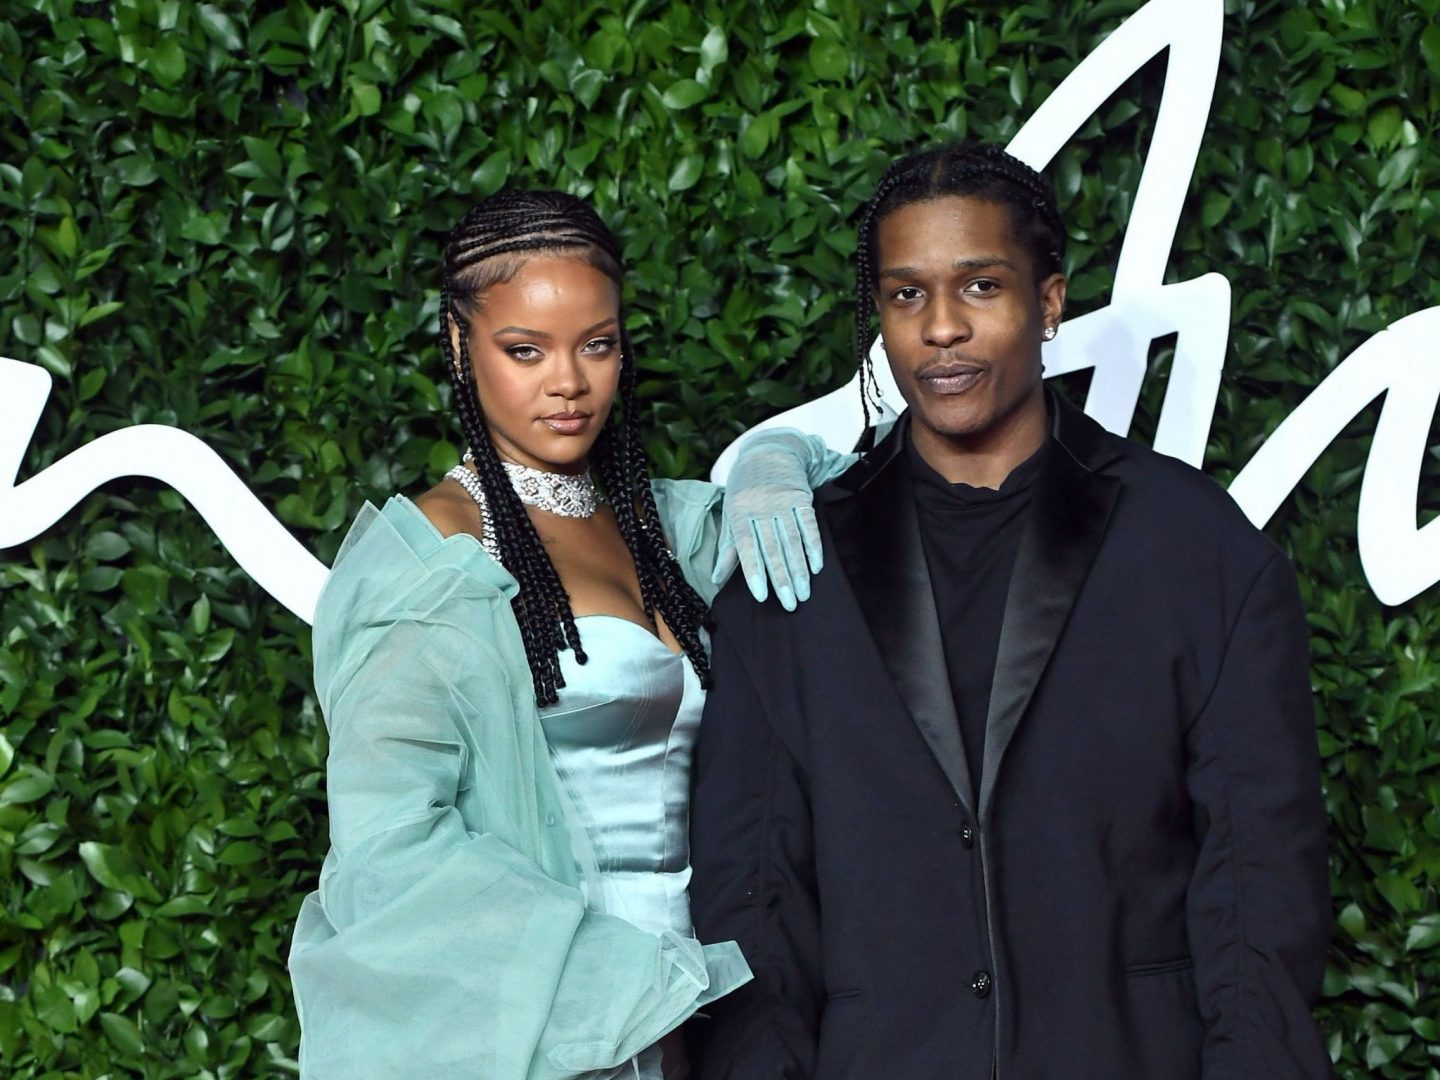 Why are rumors of Rihanna, A$AP Rocky having a baby being reported?